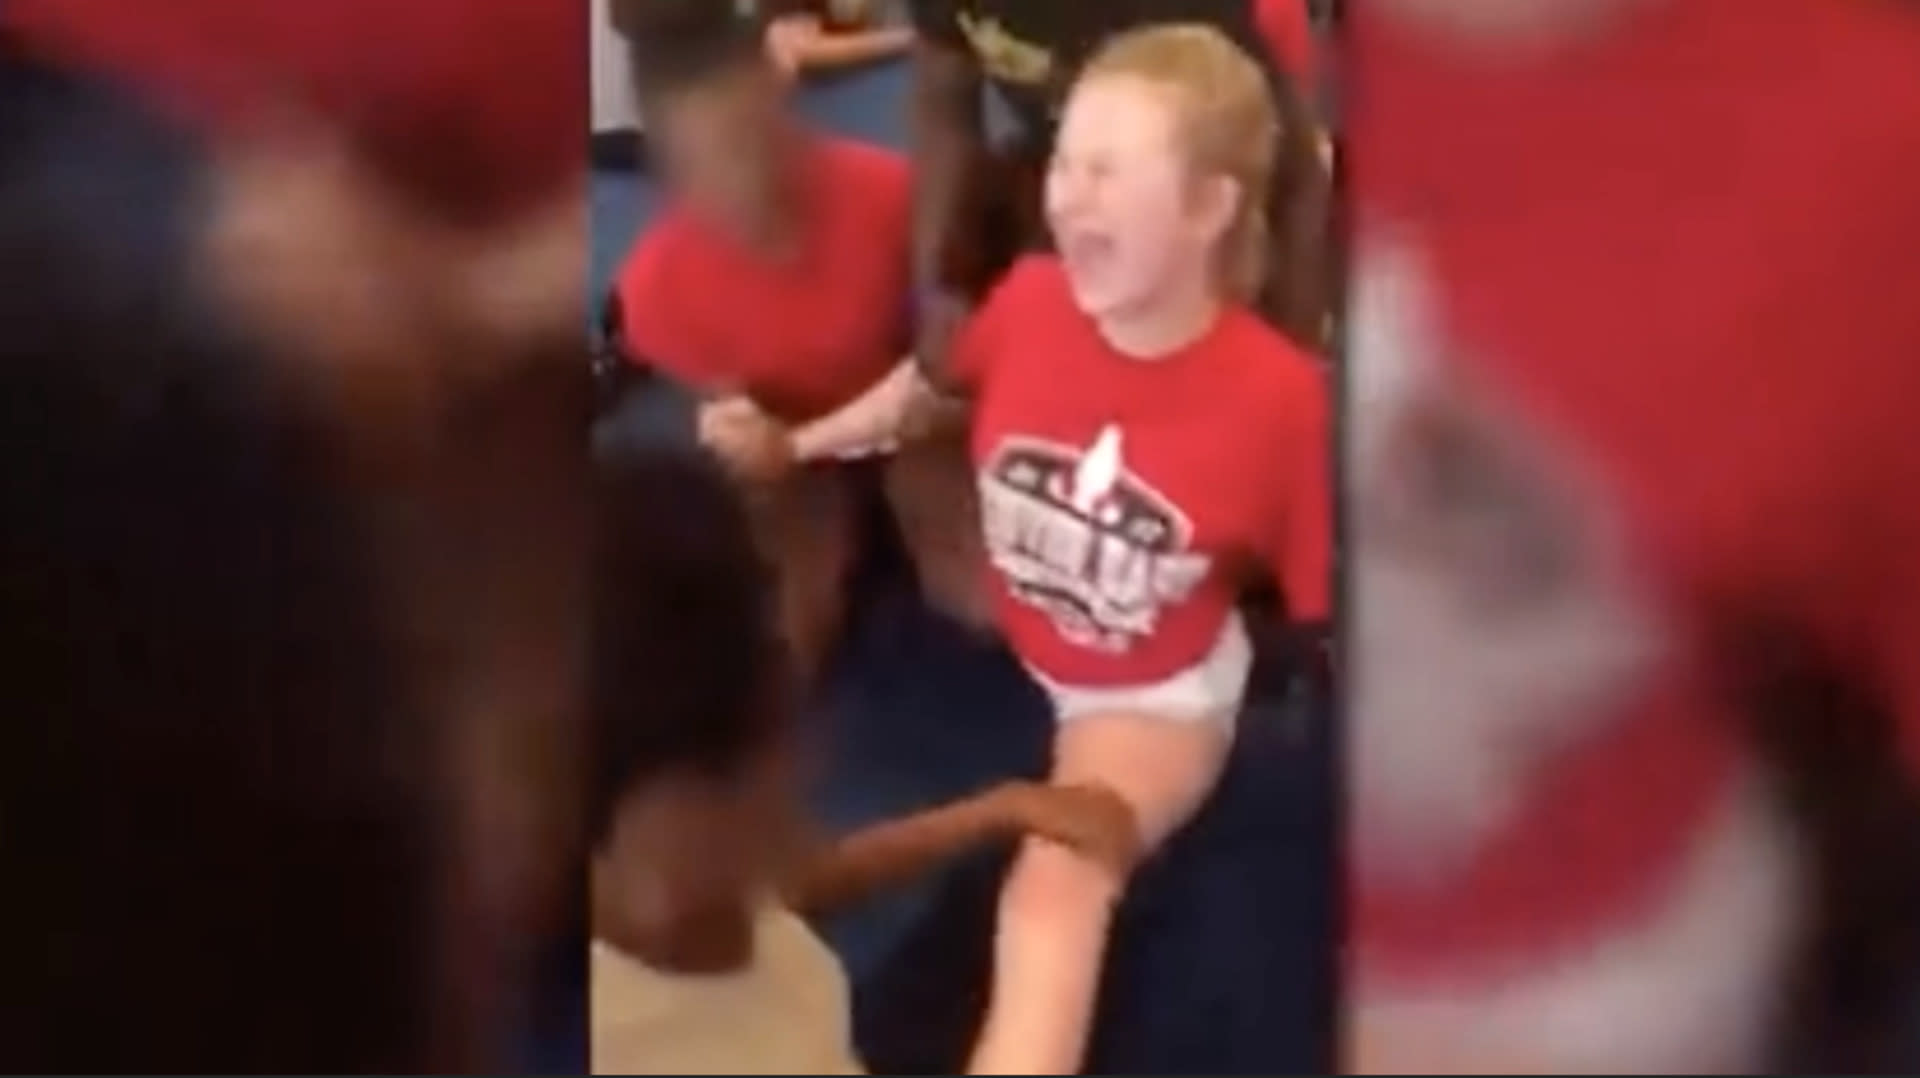 A Disturbing Video Shows A High School Cheerleader Forced Into A Split By Her Coach And Teammates 8636